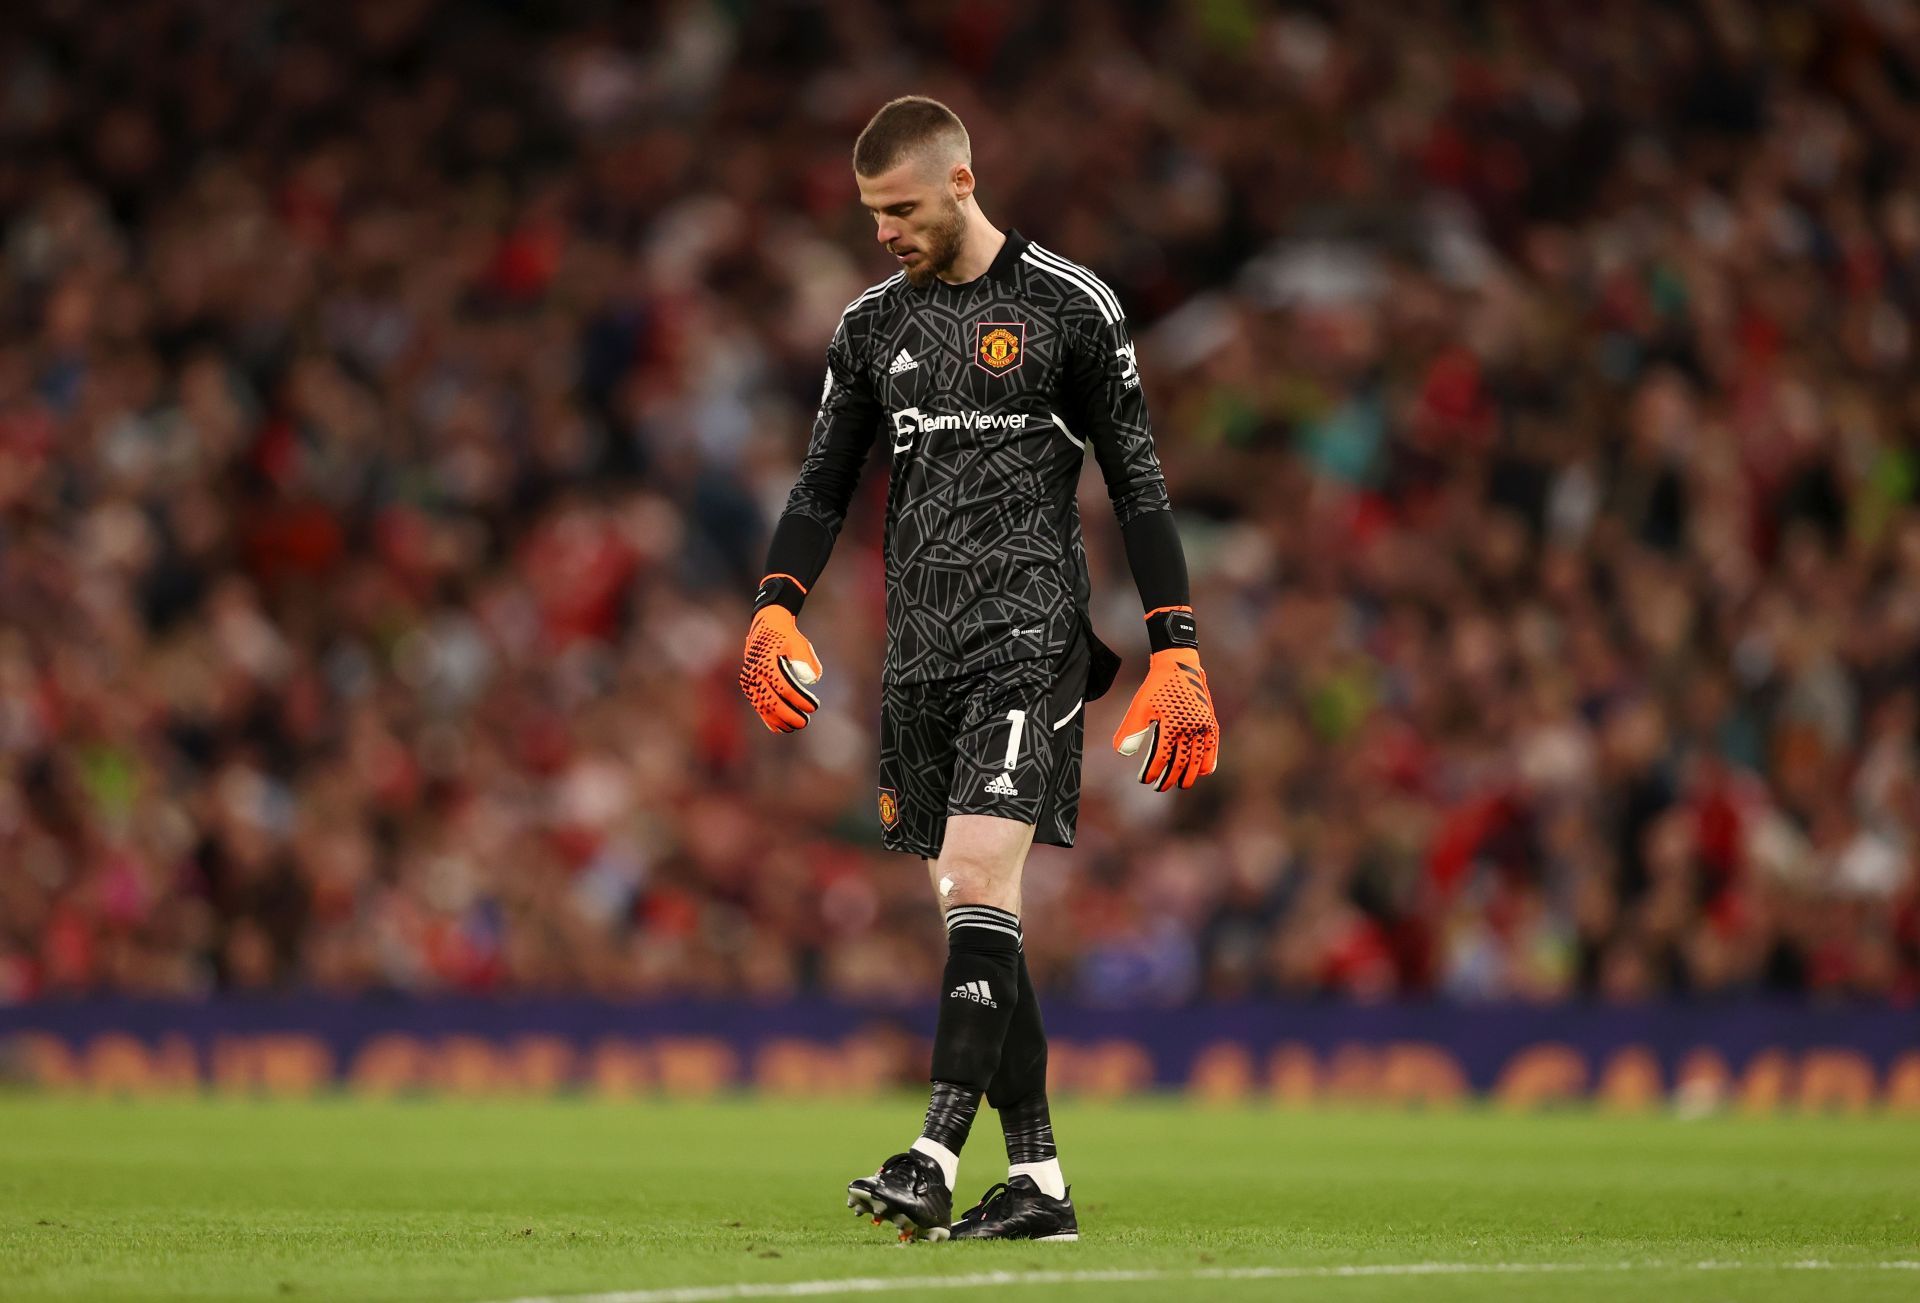 De Gea exits Manchester United after 12 years at Old Trafford